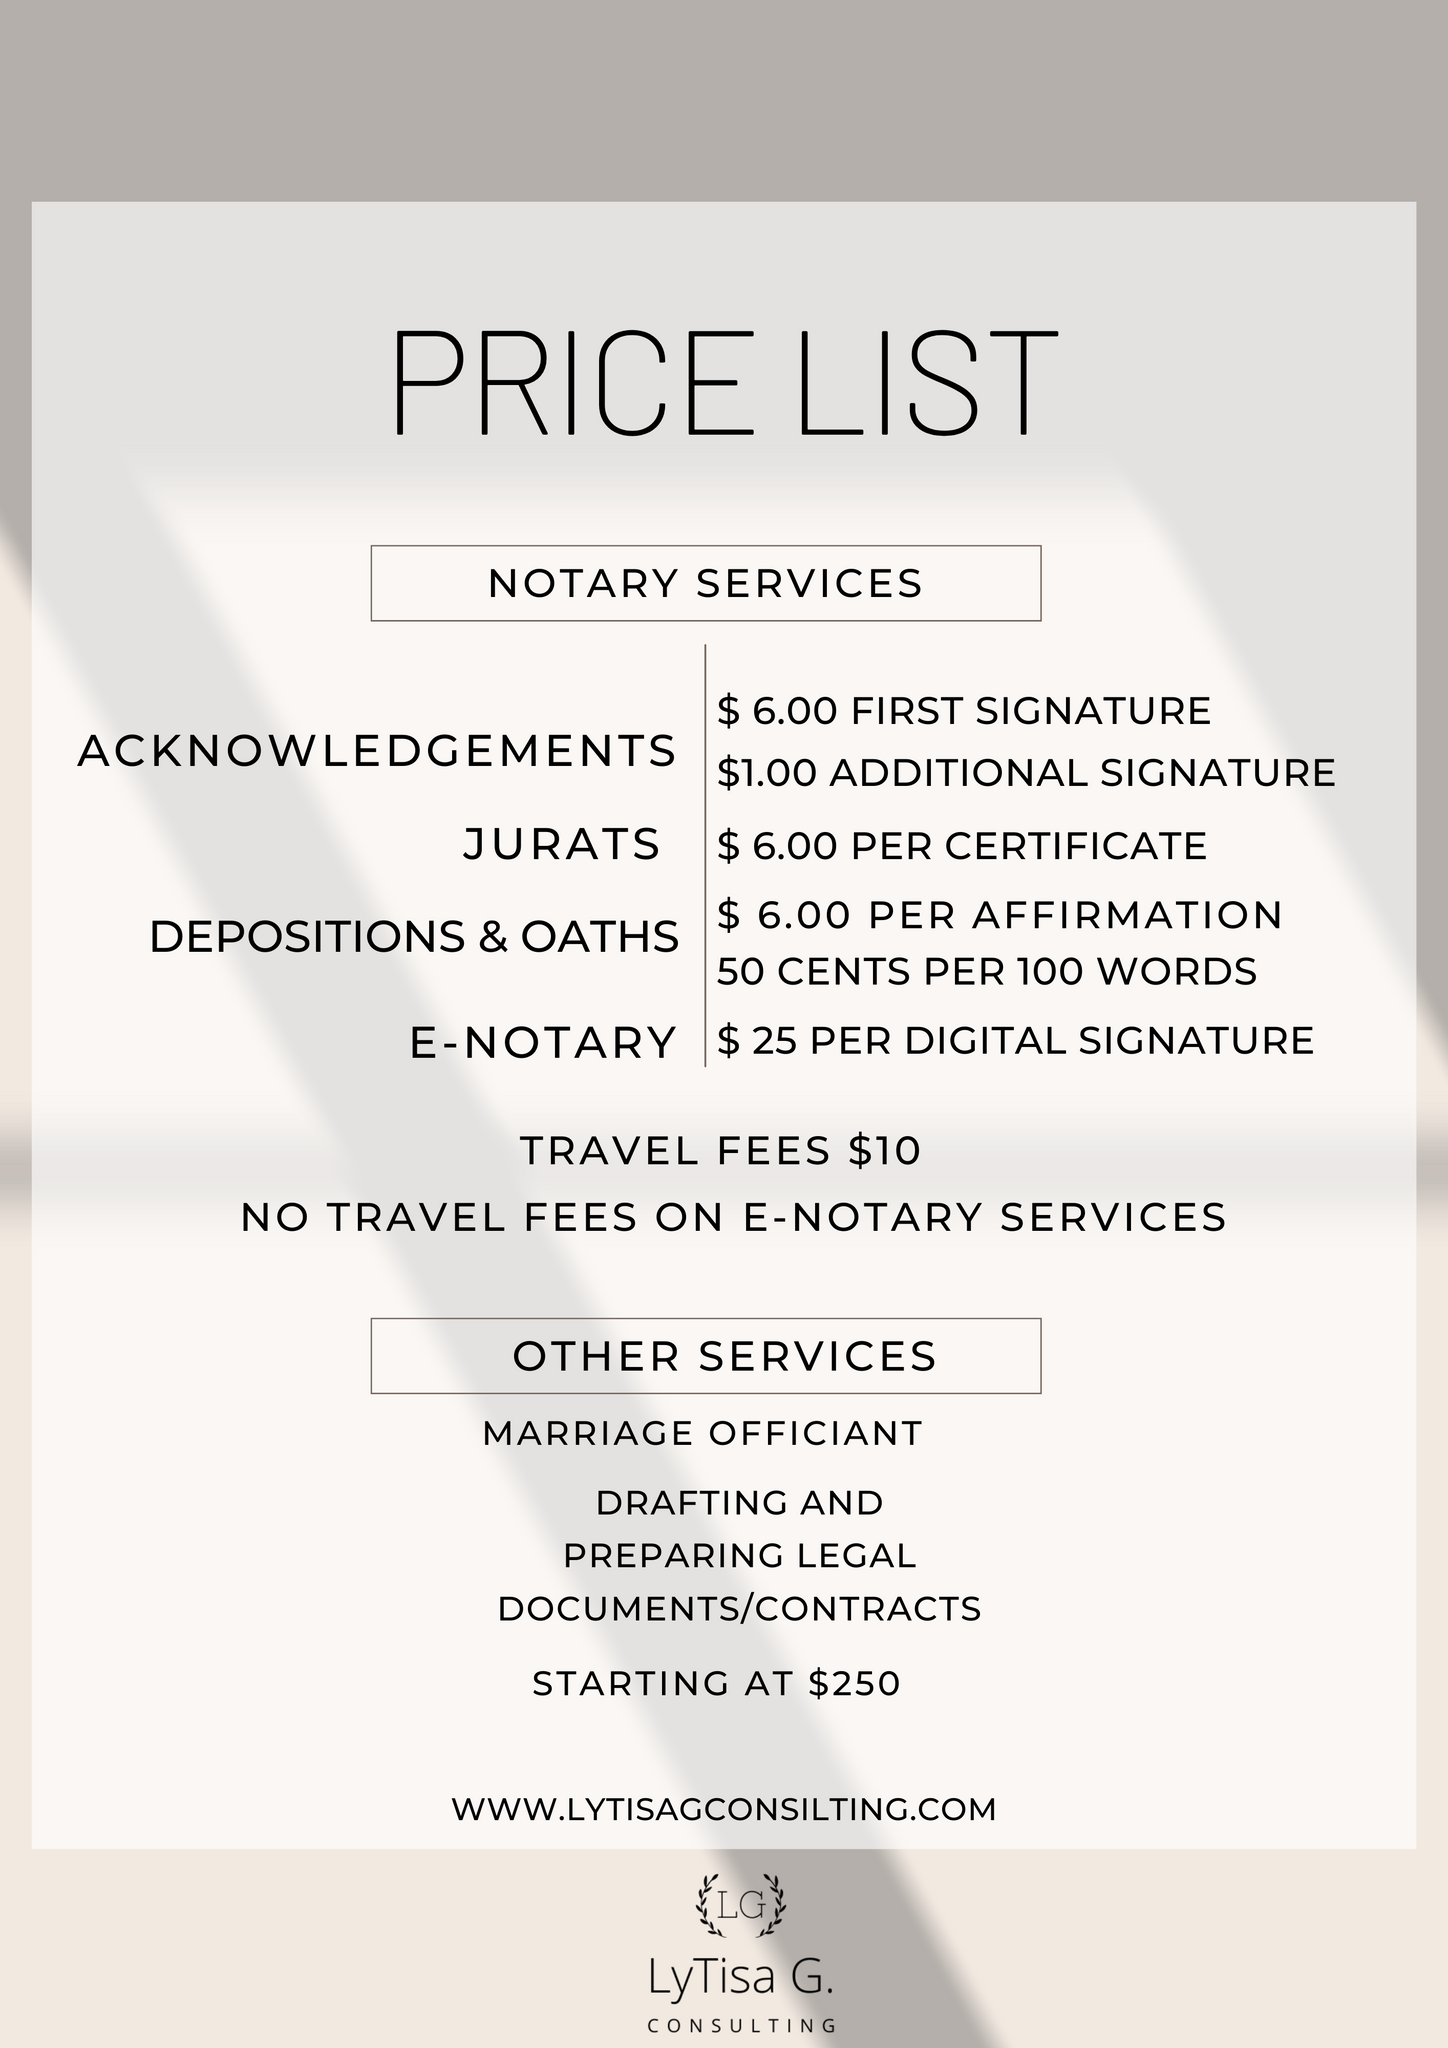 Notary/Other Services